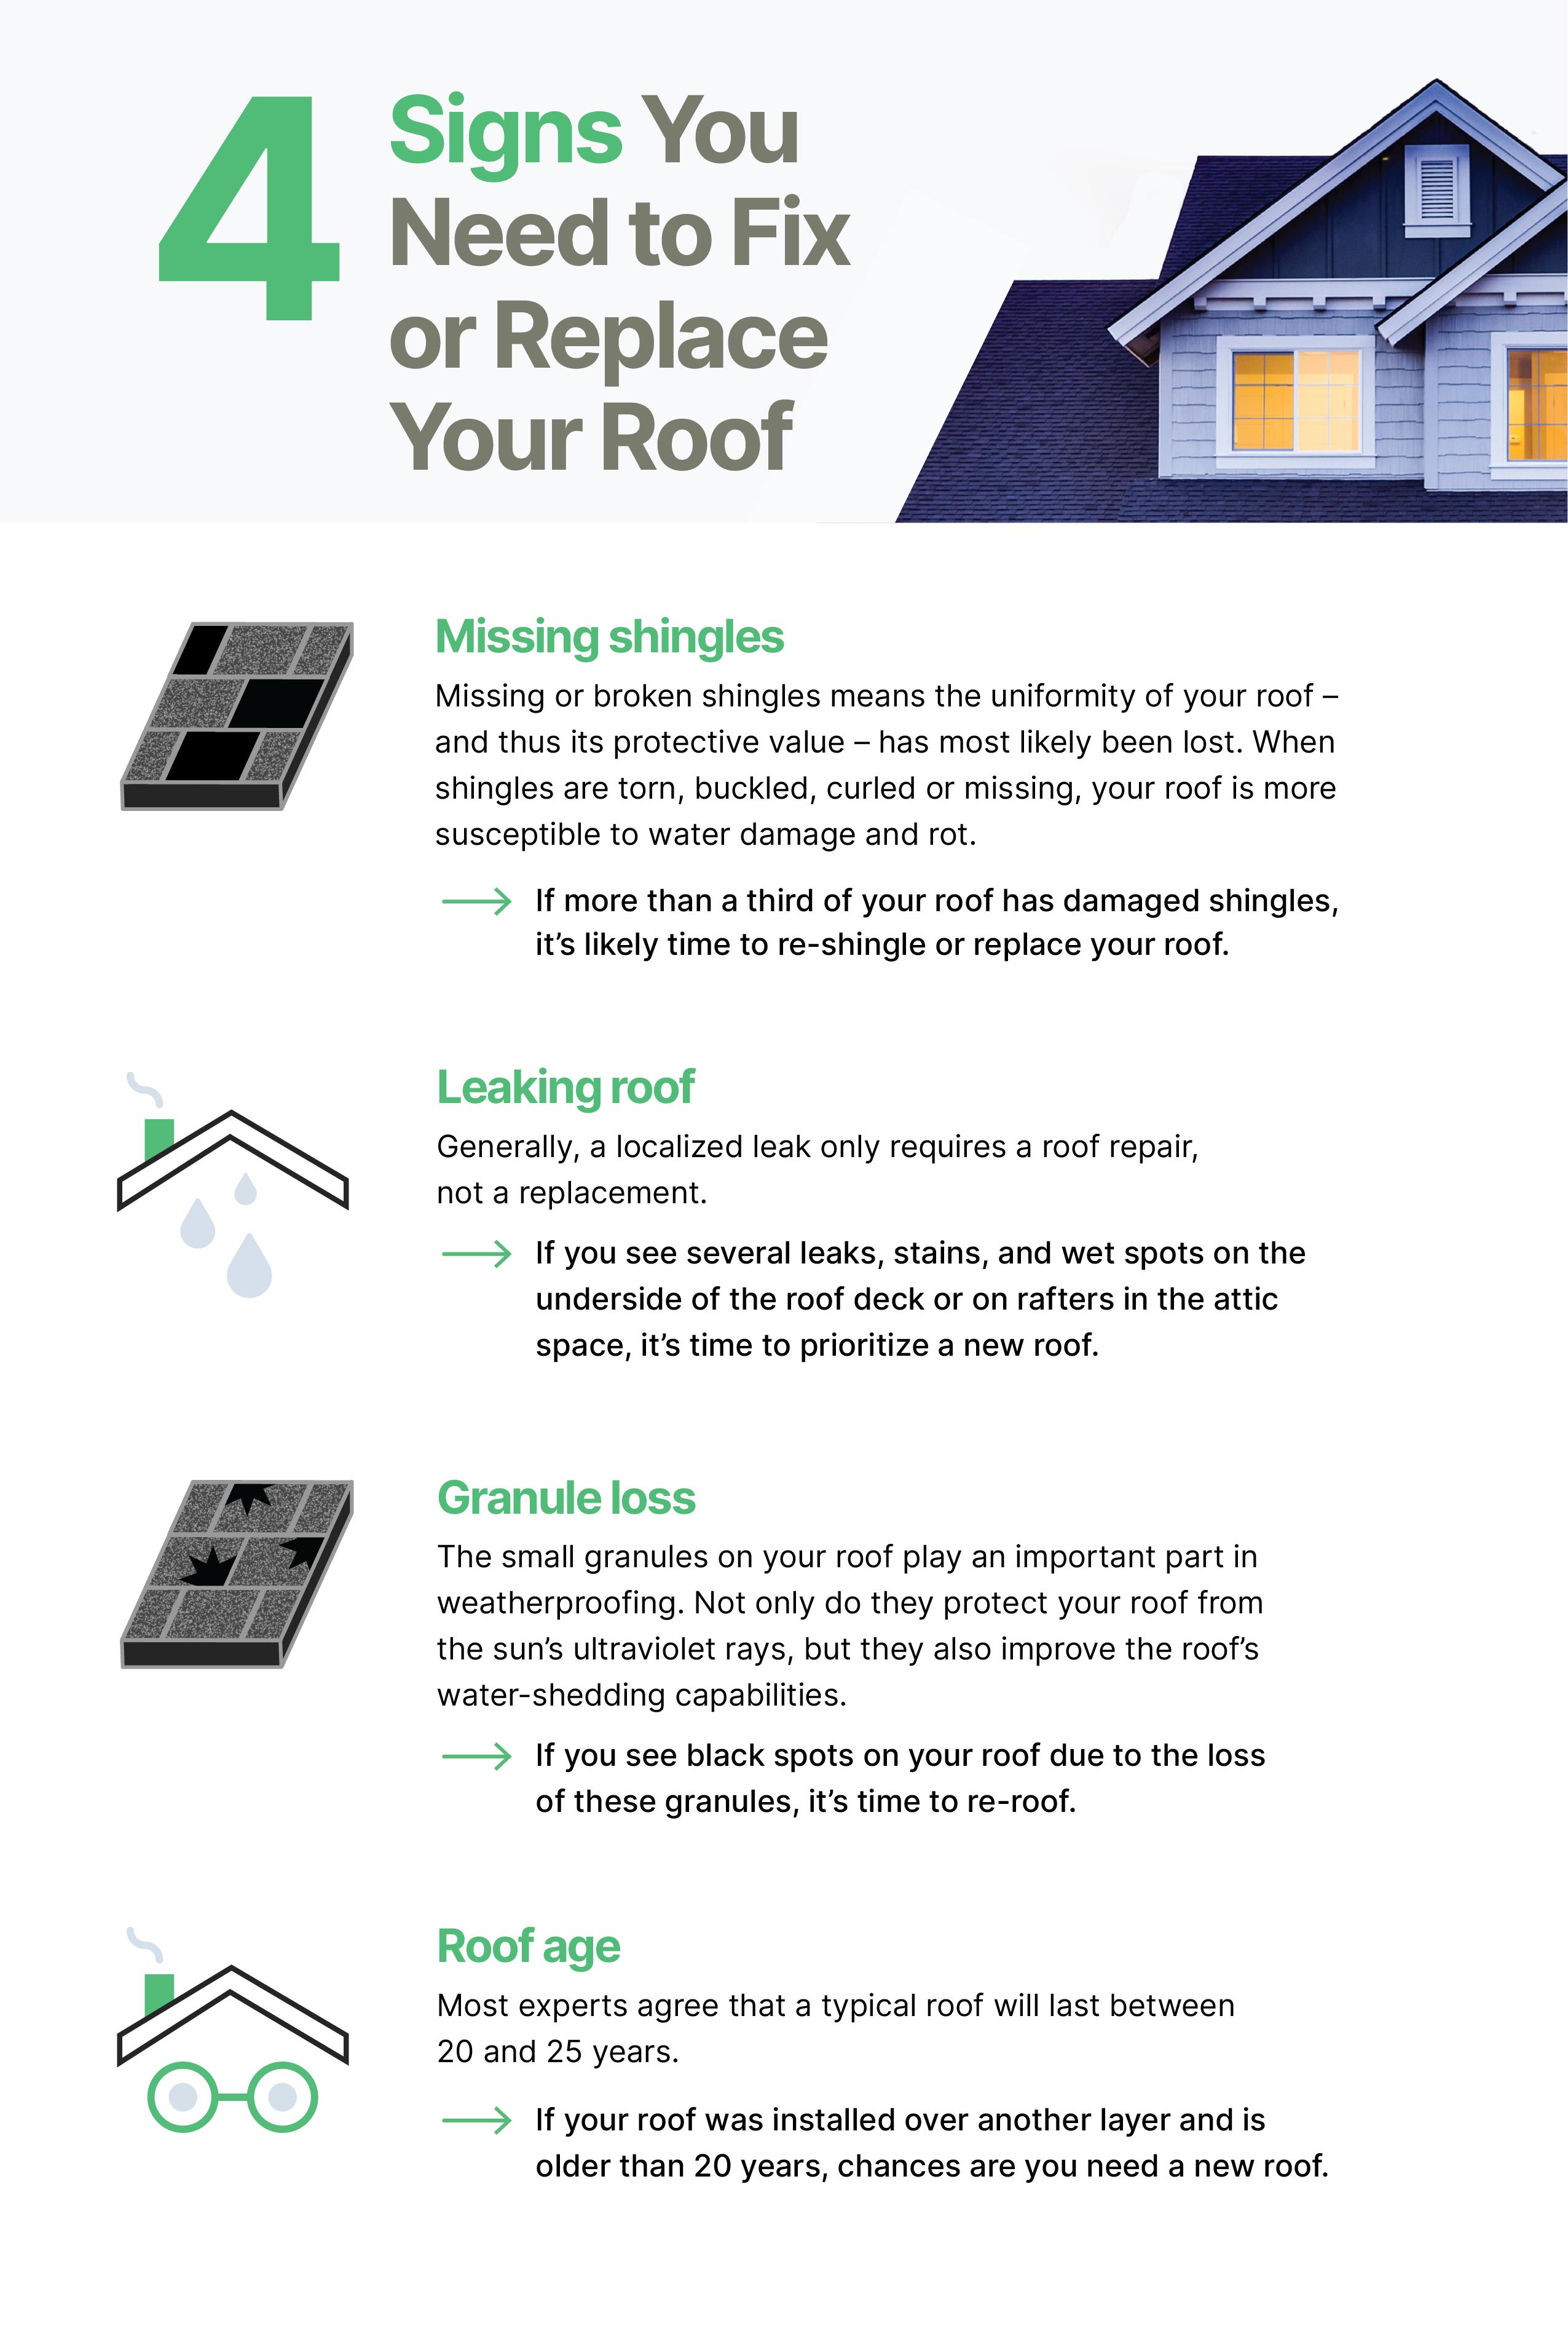 Fix your roof infographic